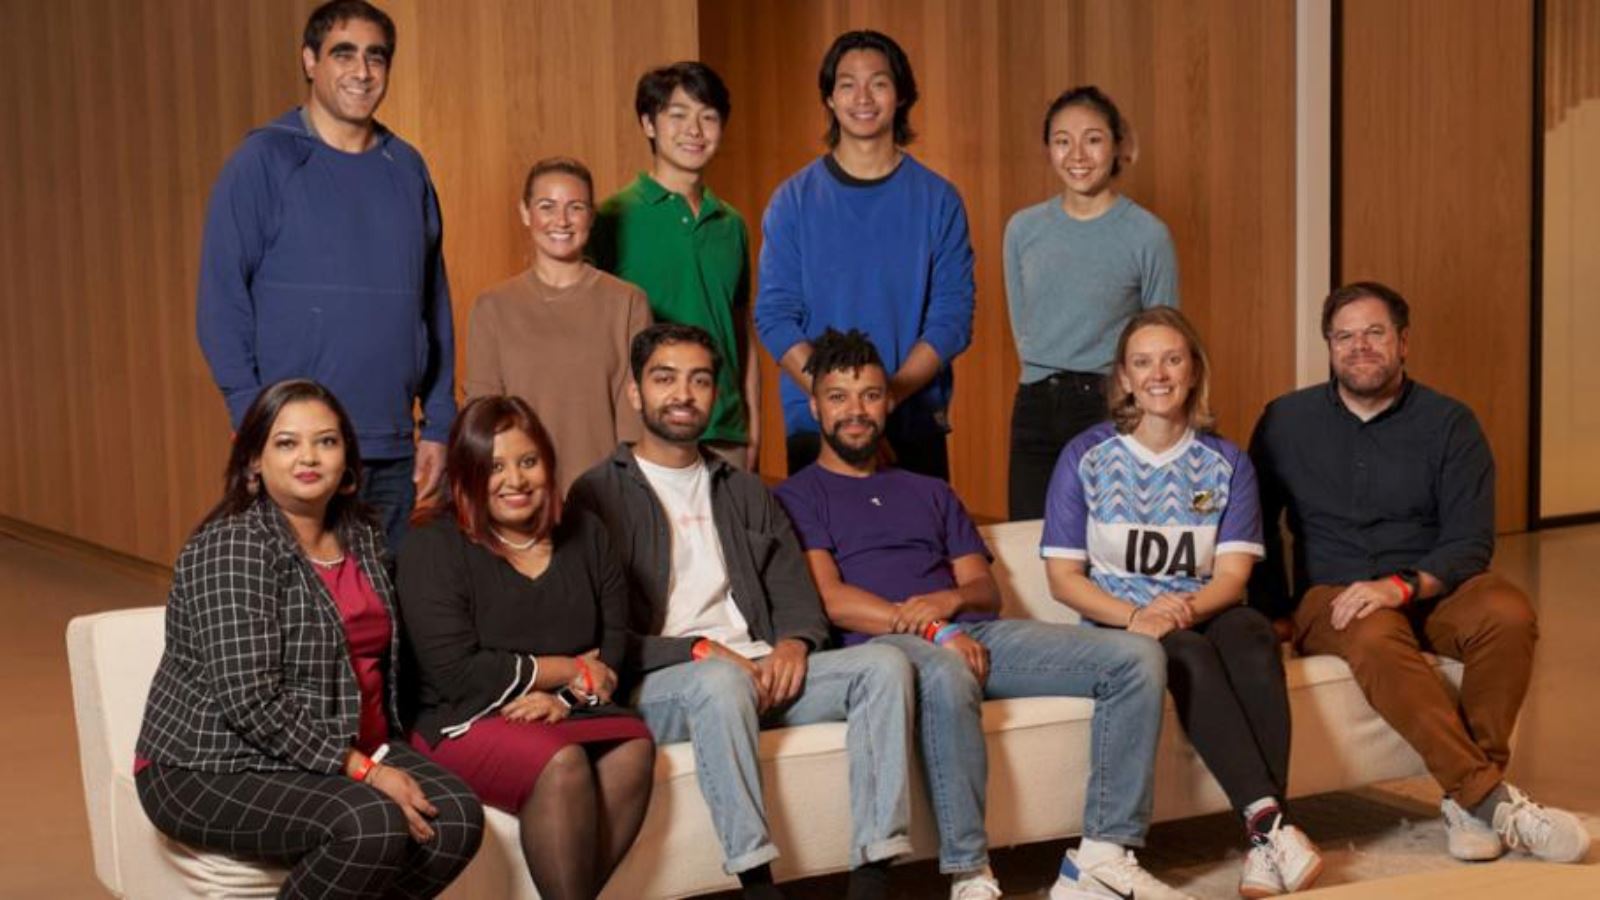 Laura Youngson, Co-Founder of IDA Sports, seated alongside finalists of the TOMMY HILFIGER FASHION FRONTIER CHALLENGE